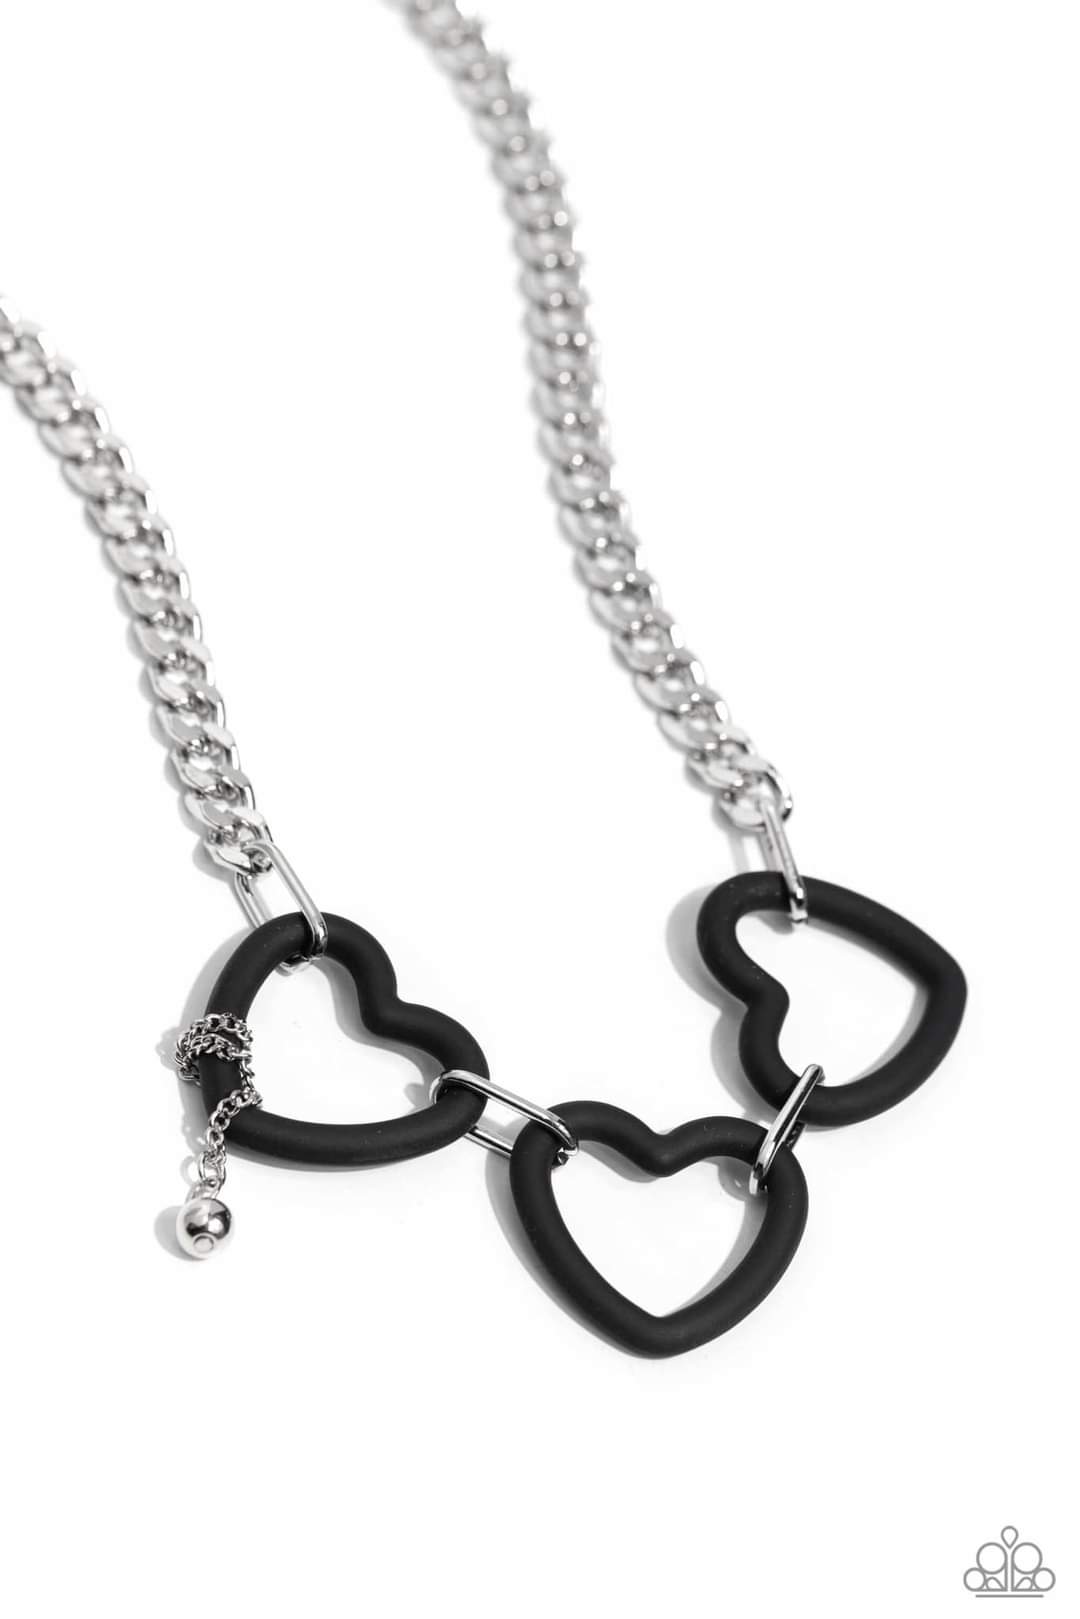 Heart Homage - Black and Silver Necklace - Paparazzi Accessories - Attached to a flat silver curb chain, a trio of black acrylic heart frames delicately link and dangle down the neckline. Wrapped along one of the frames, a silver bead dangles at the end of a dainty silver chain for a dash of swoon-worthy shimmer.